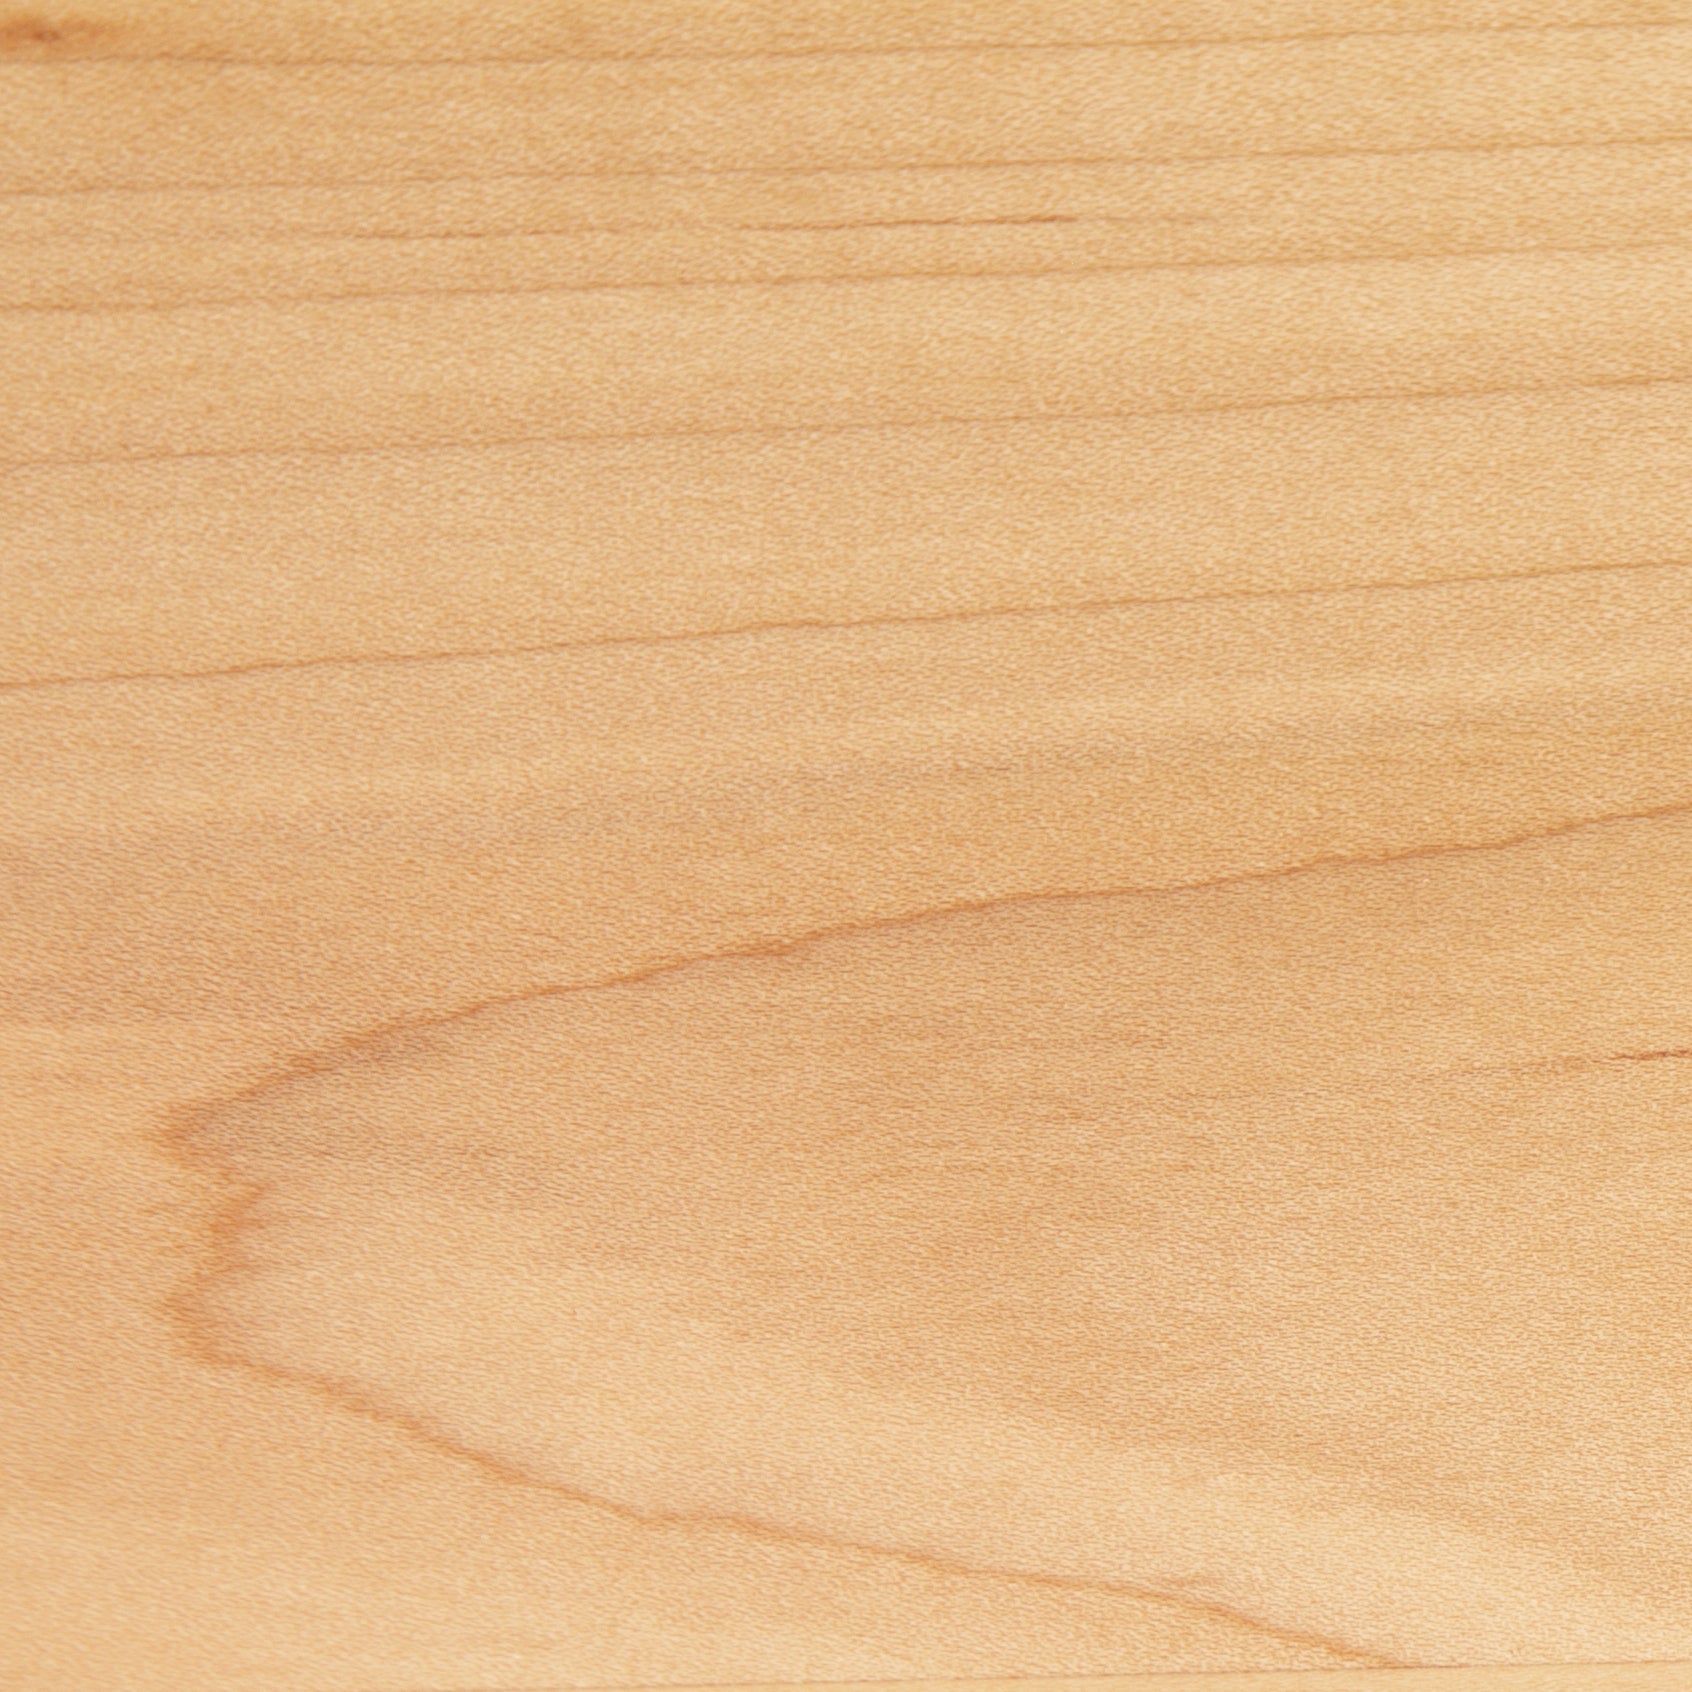 A close up of a wooden surface.